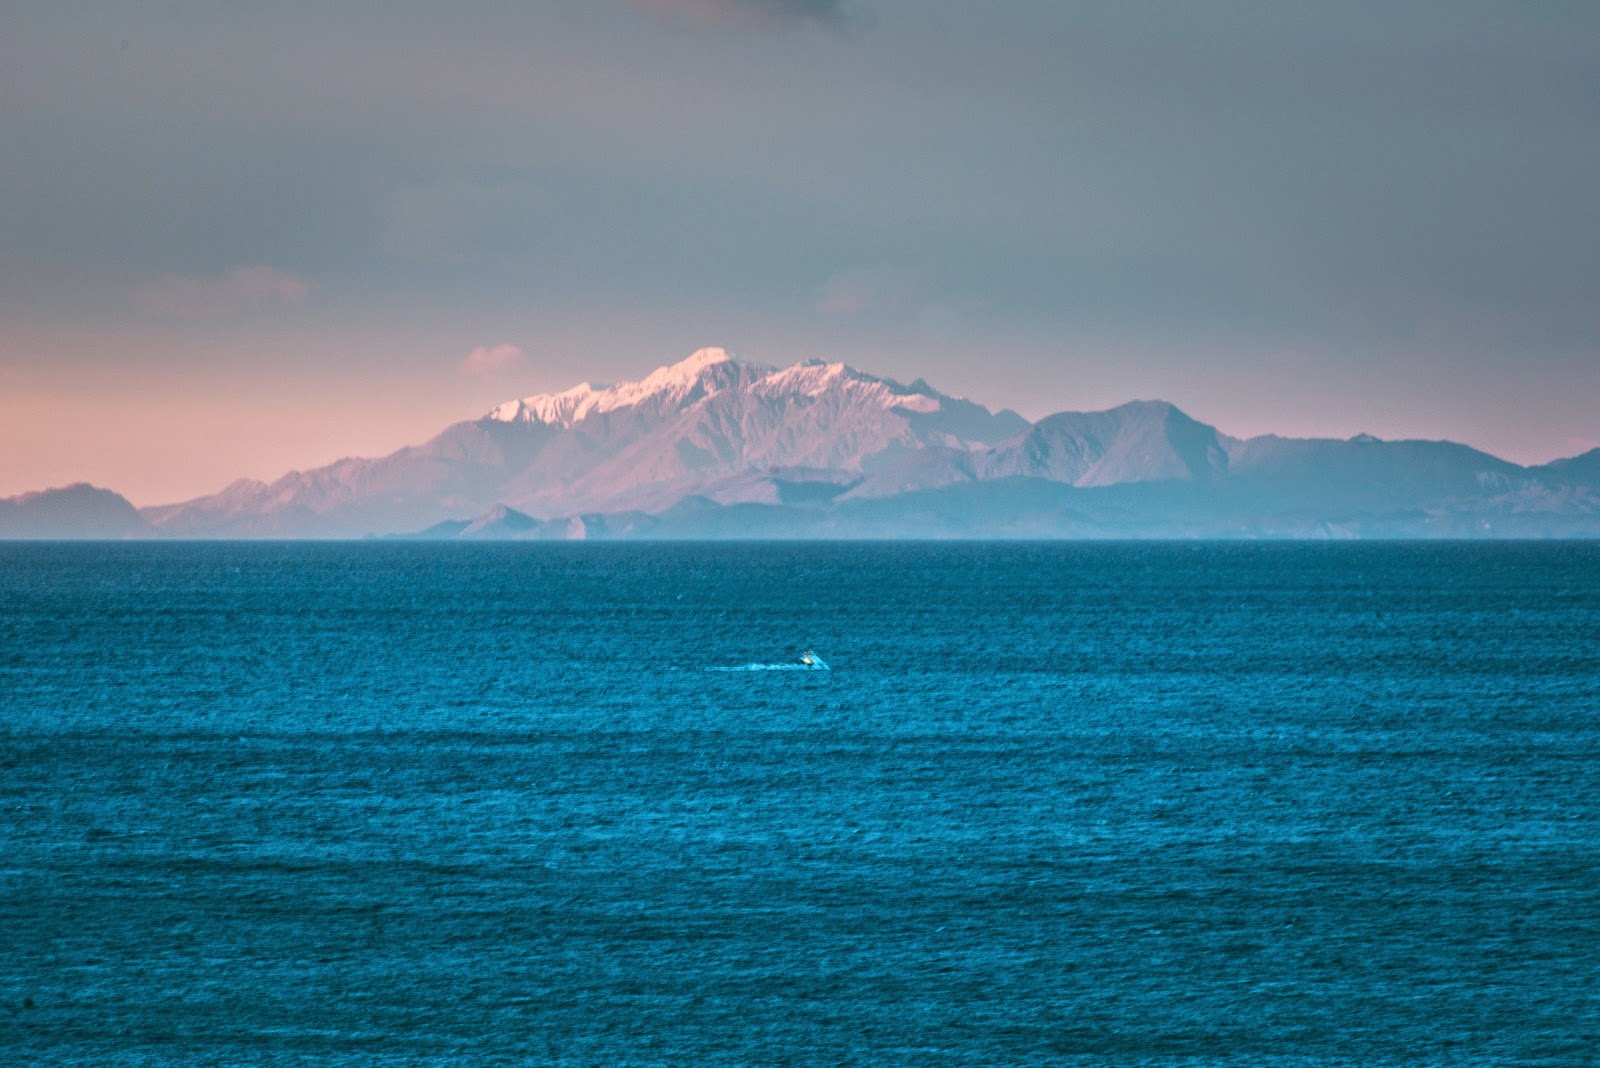 Kaikoura mountain, fishing boat and Cook Strait